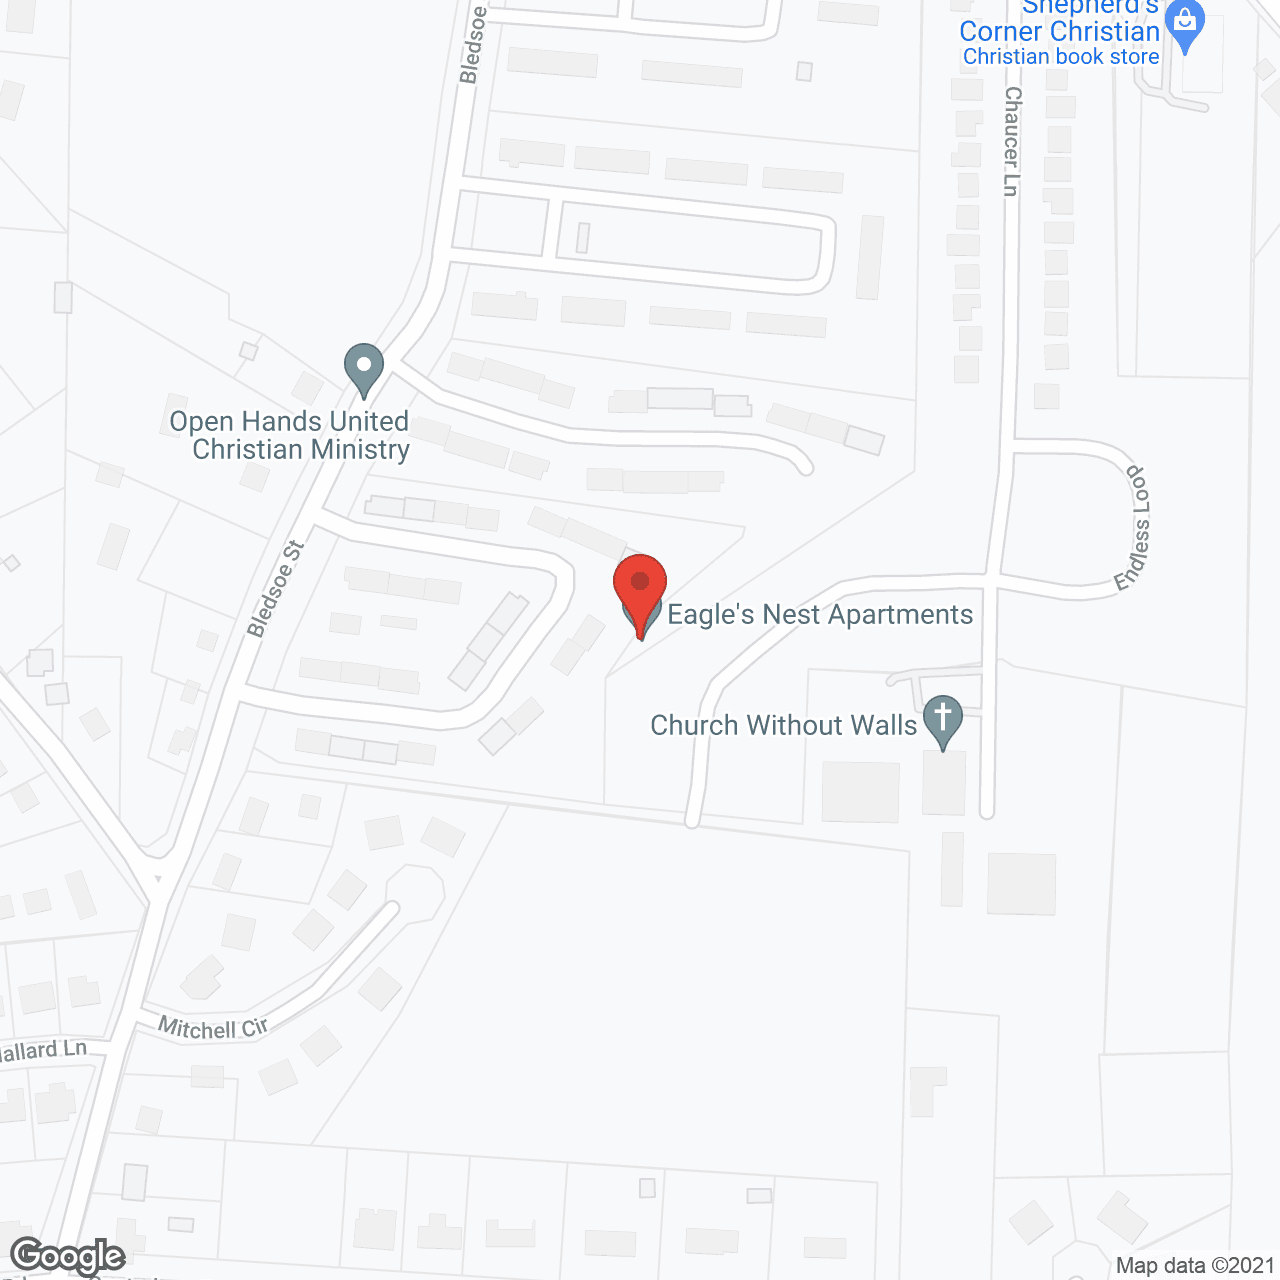 Eagle's Nest Apartments in google map